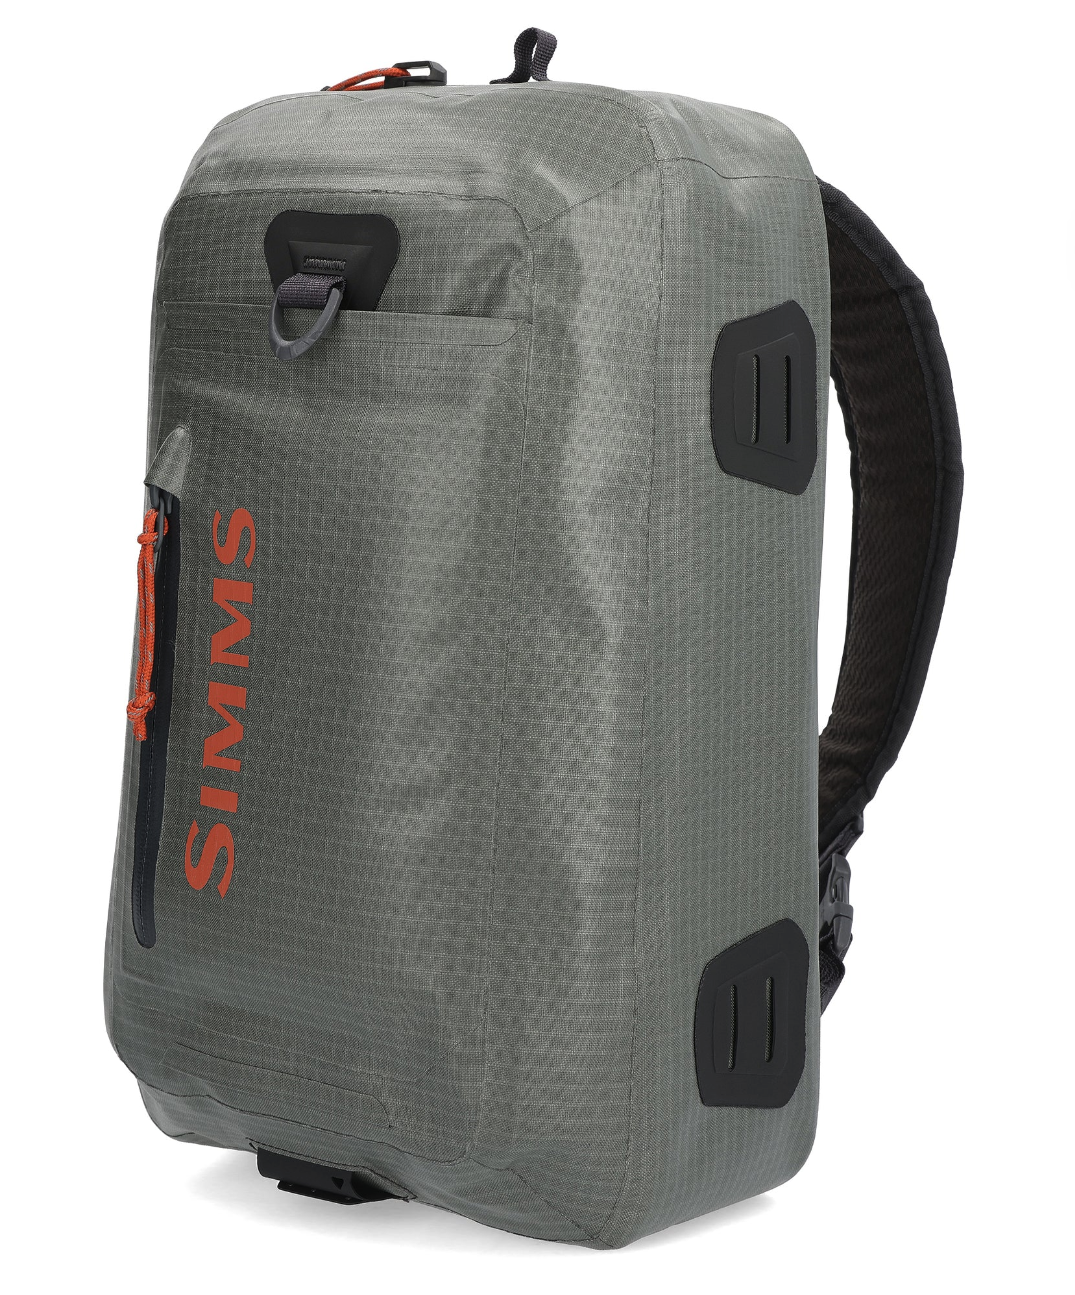 Buy  Simms Dry Creek Z Sling Pack online at The Fly Fishers.